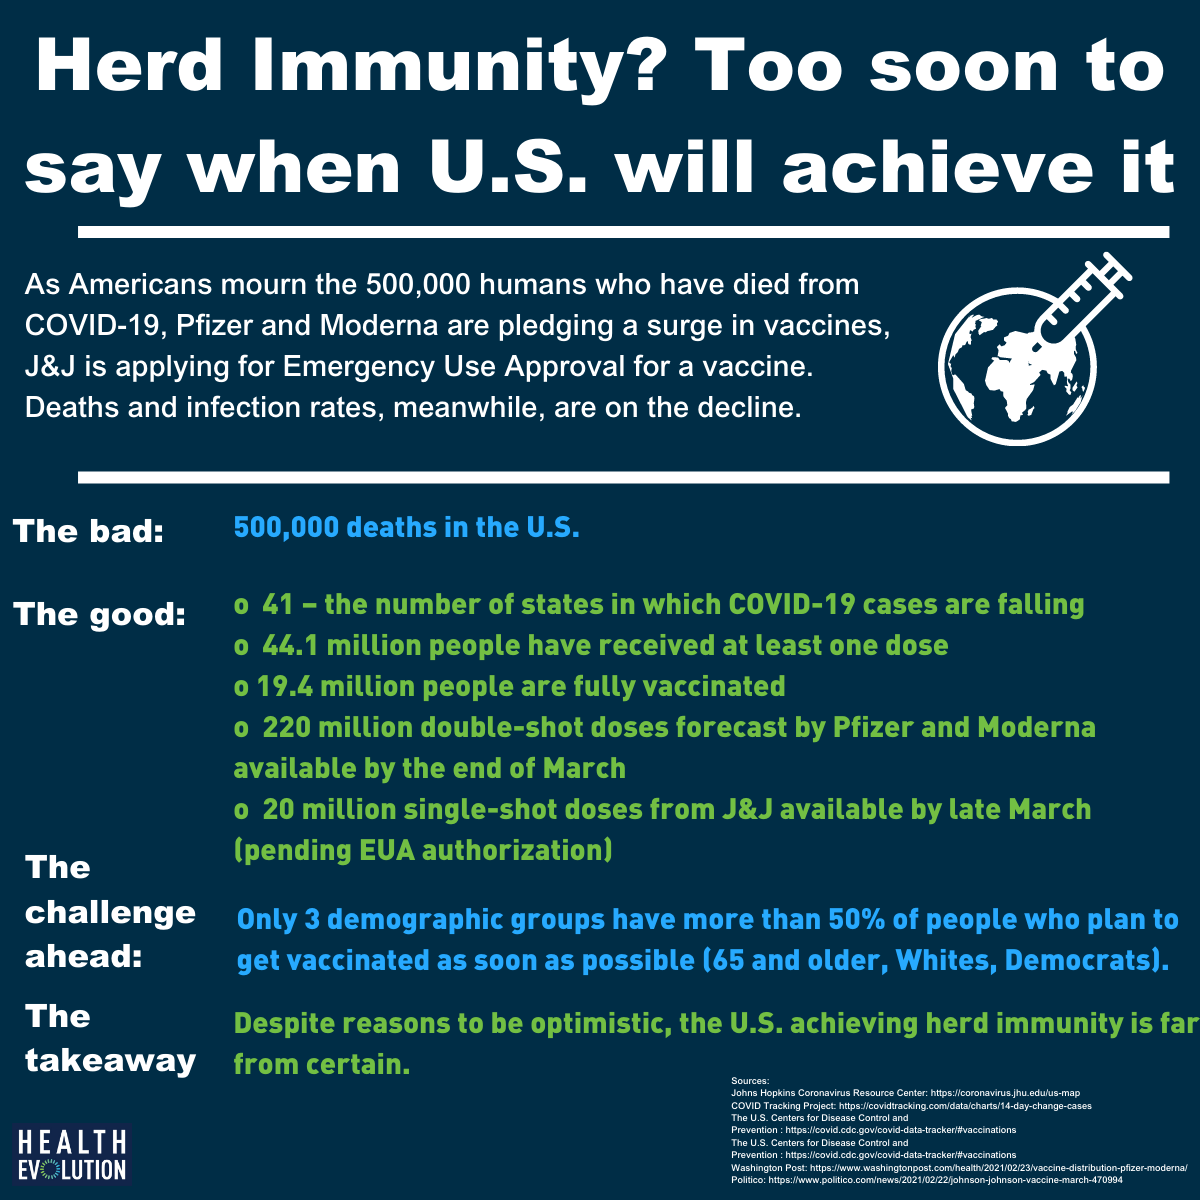 Data dive: What deaths, infections and new vaccines suggest about herd immunity